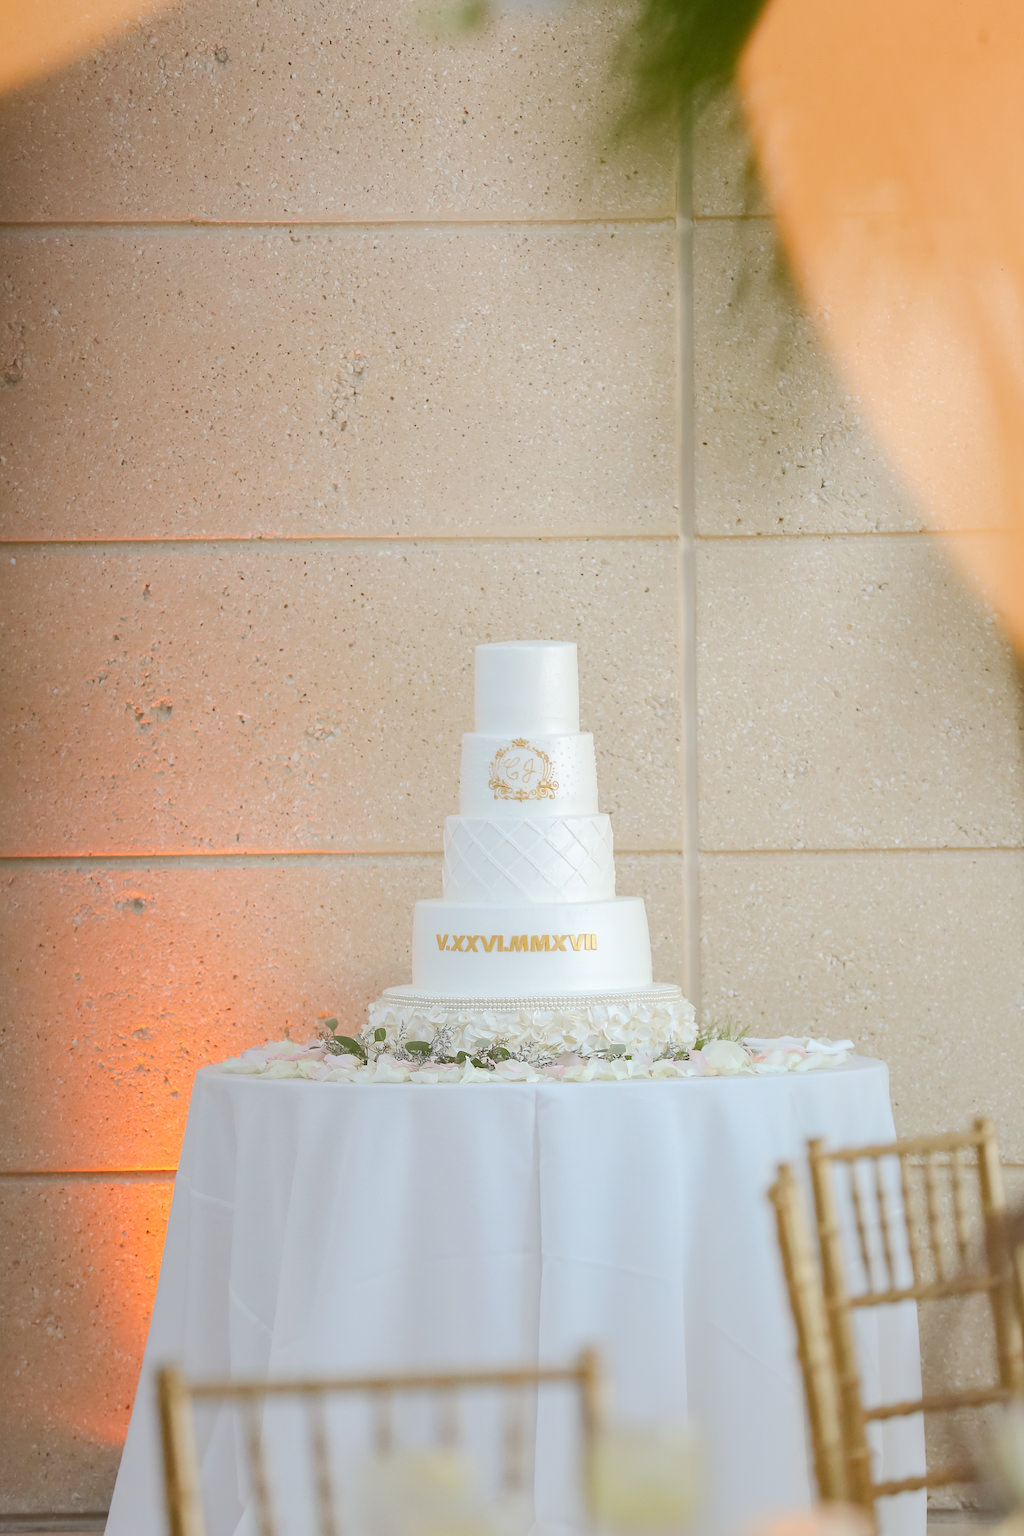 4 Tier Elegant and Simple White Wedding Cake with Gold Monogram and Wedding Date | St. Petersburg Photographer Lifelong Photography Studios | Tampa Bay Catering and Cake Olympia Catering